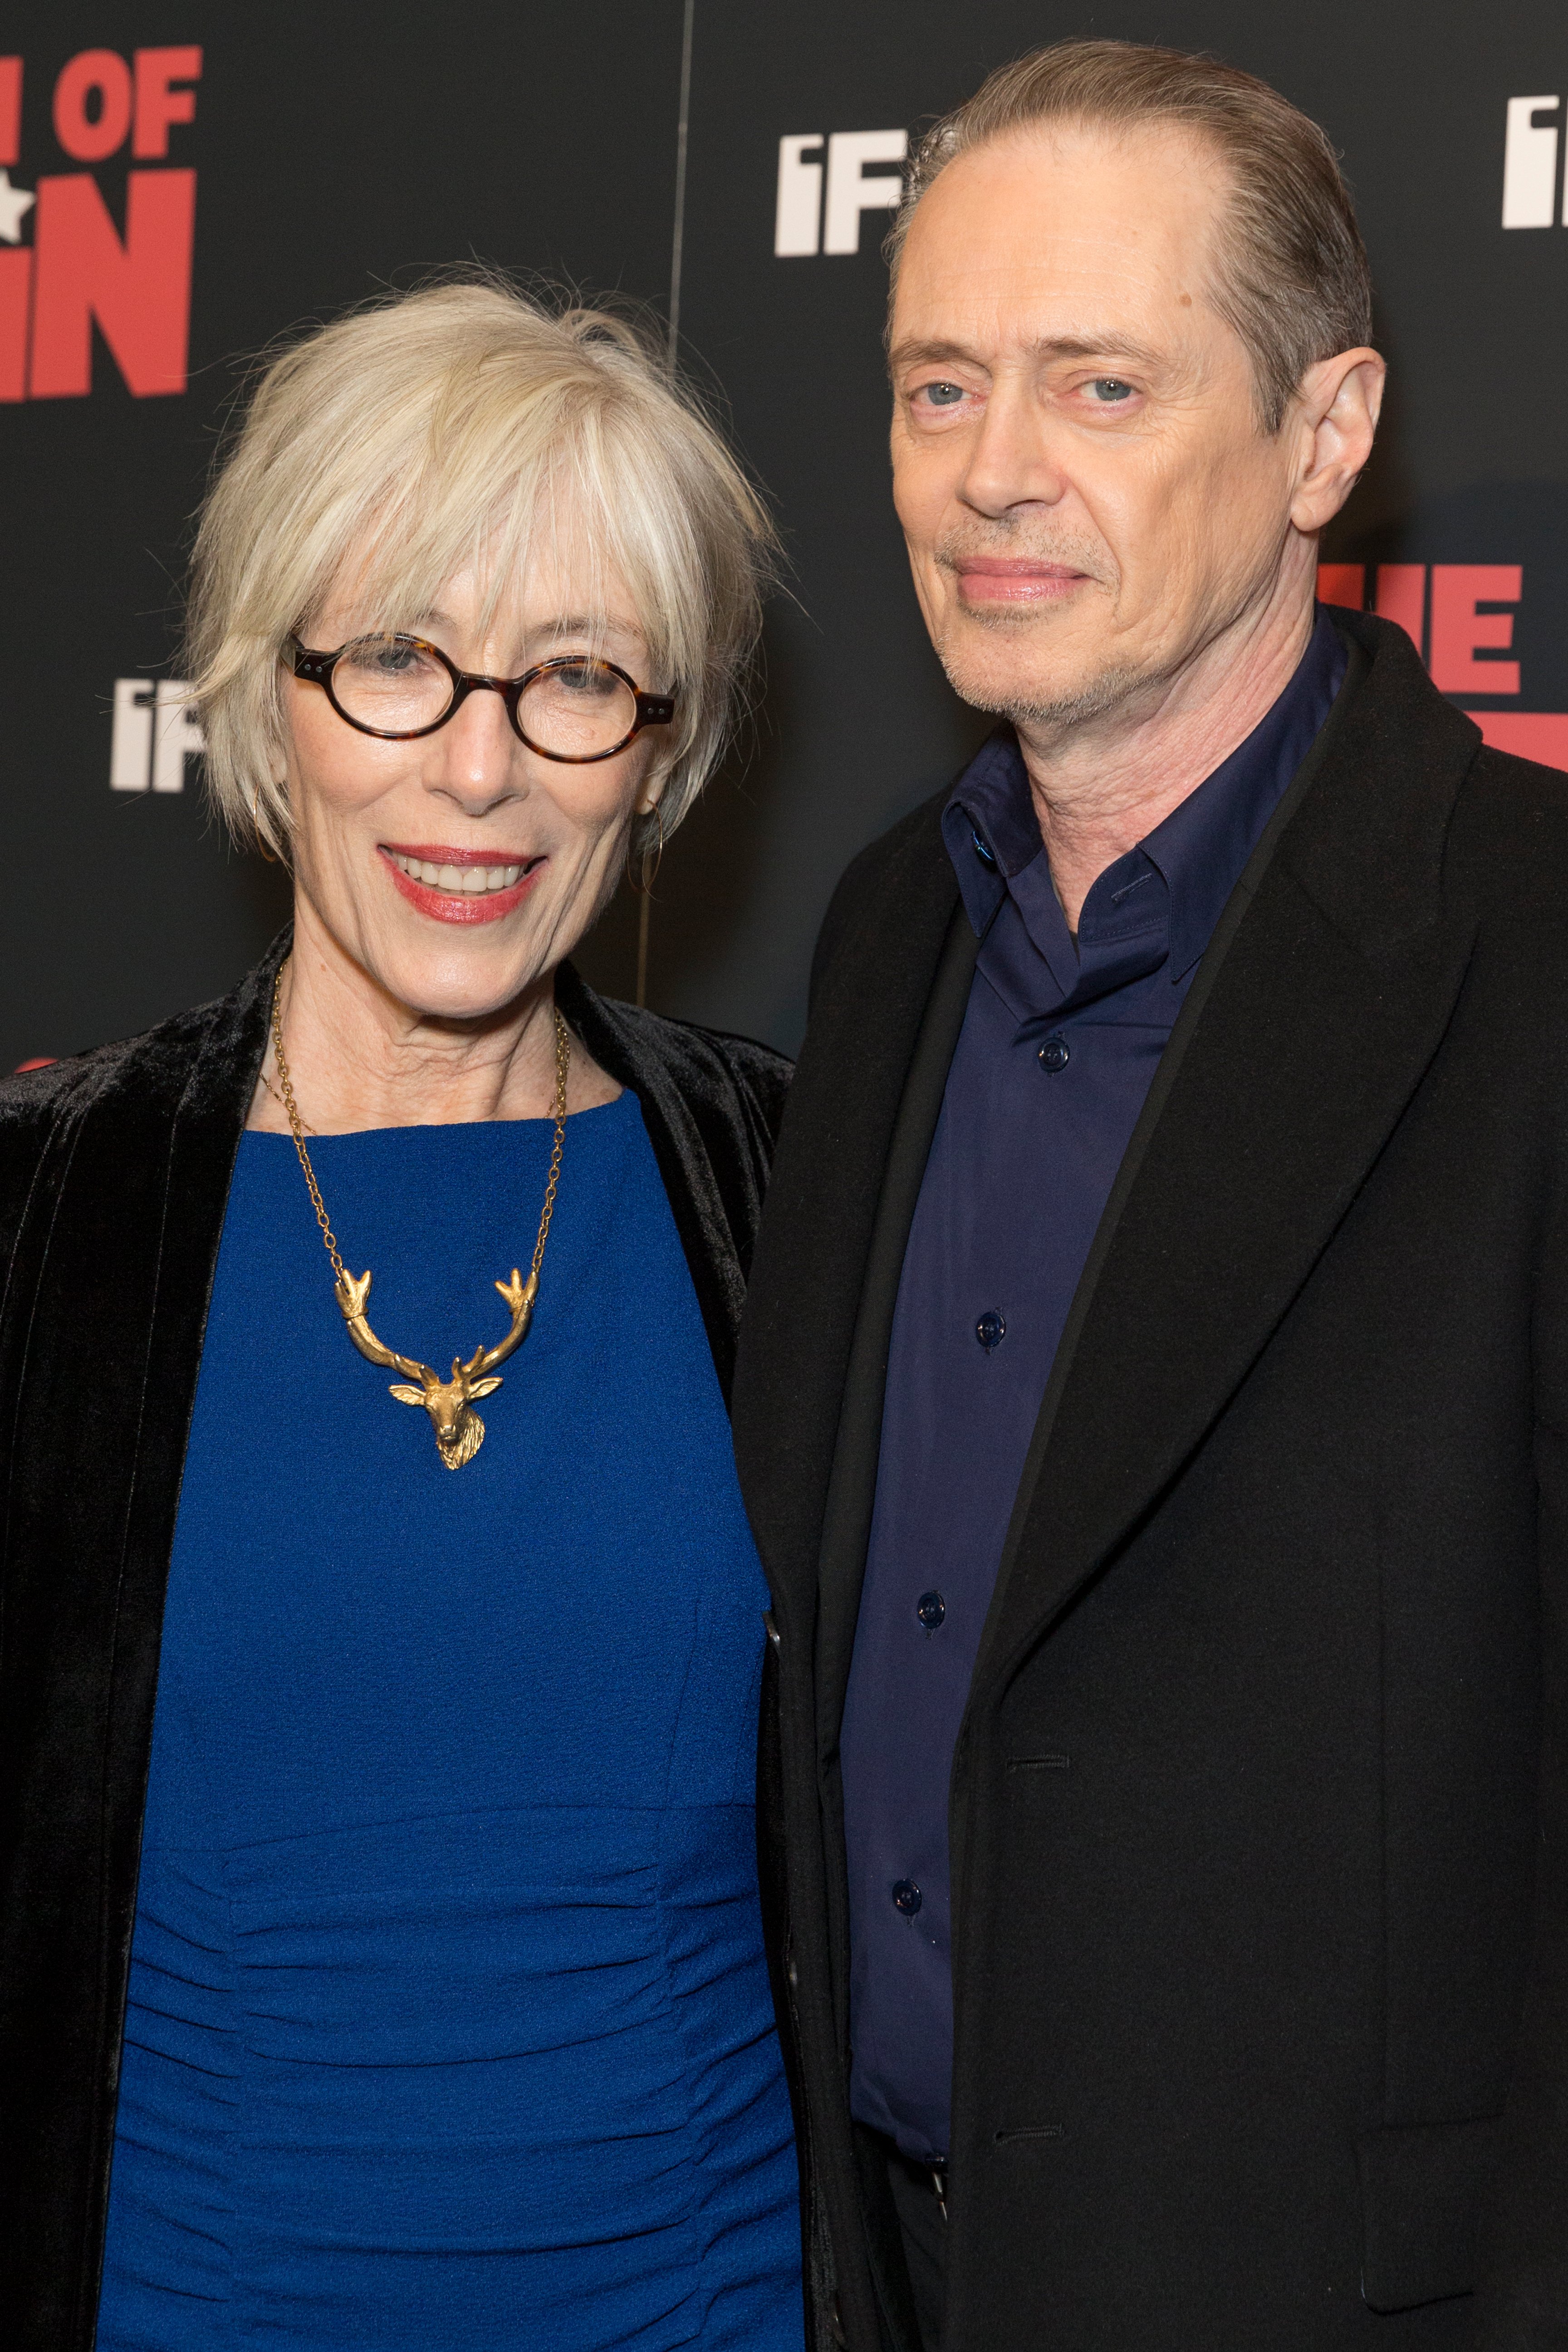 Jo Andres and Steve Buscemi attend New York premiere of IFC Film Death of Stalin at AMC Lincoln Square, March 8, 2018 | Photo: Shutterstock